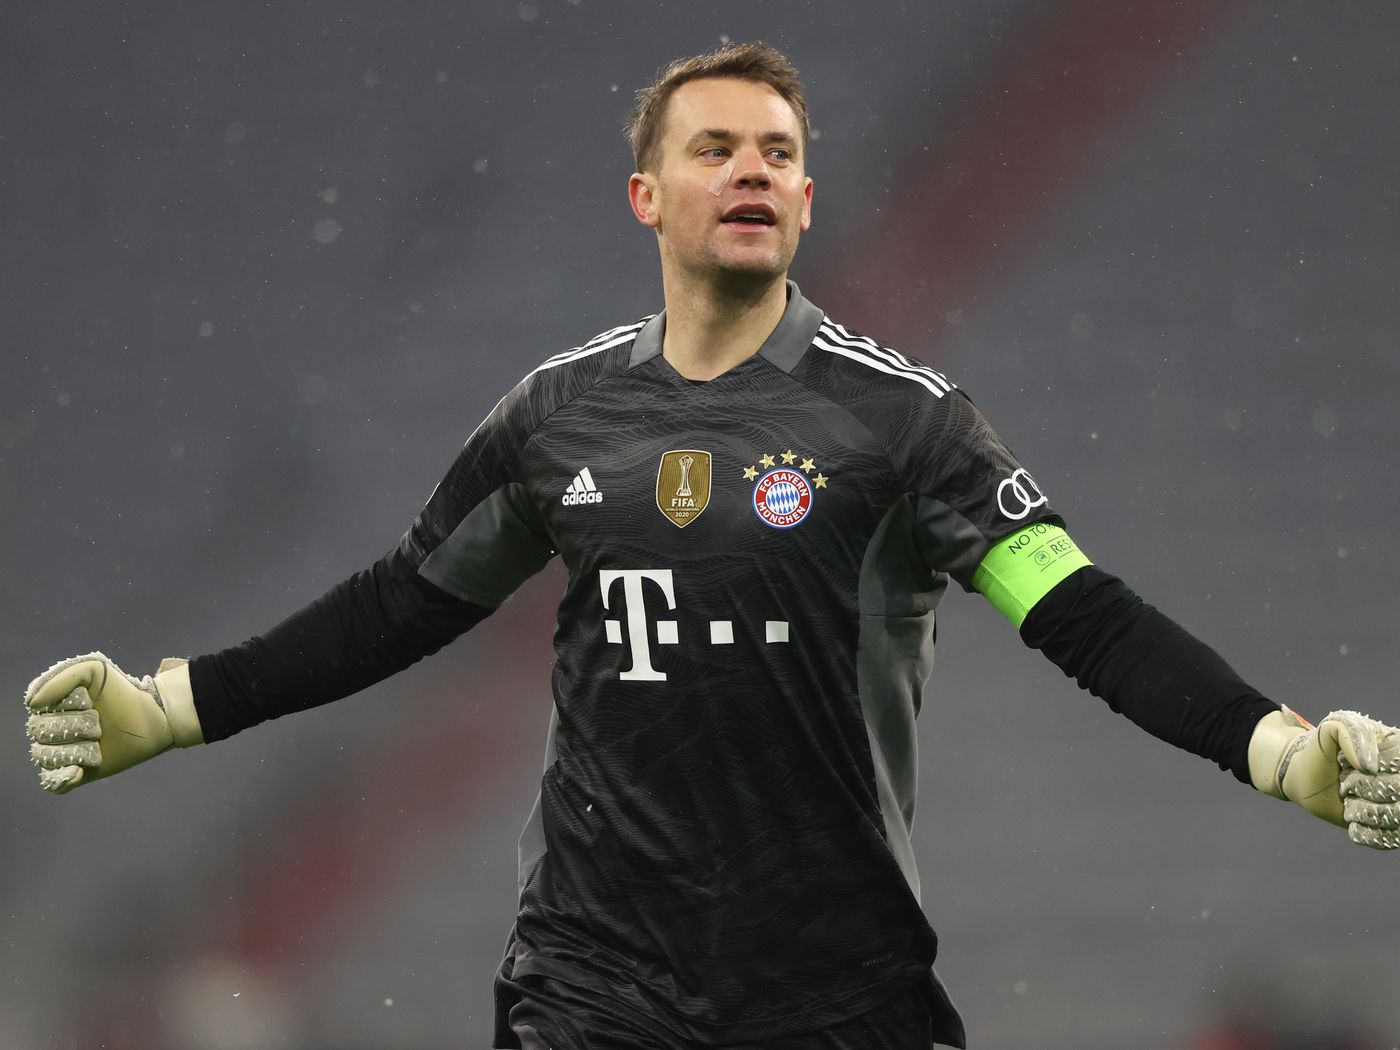 Bayern Munich extends Manuel Neuer's contract for another year.